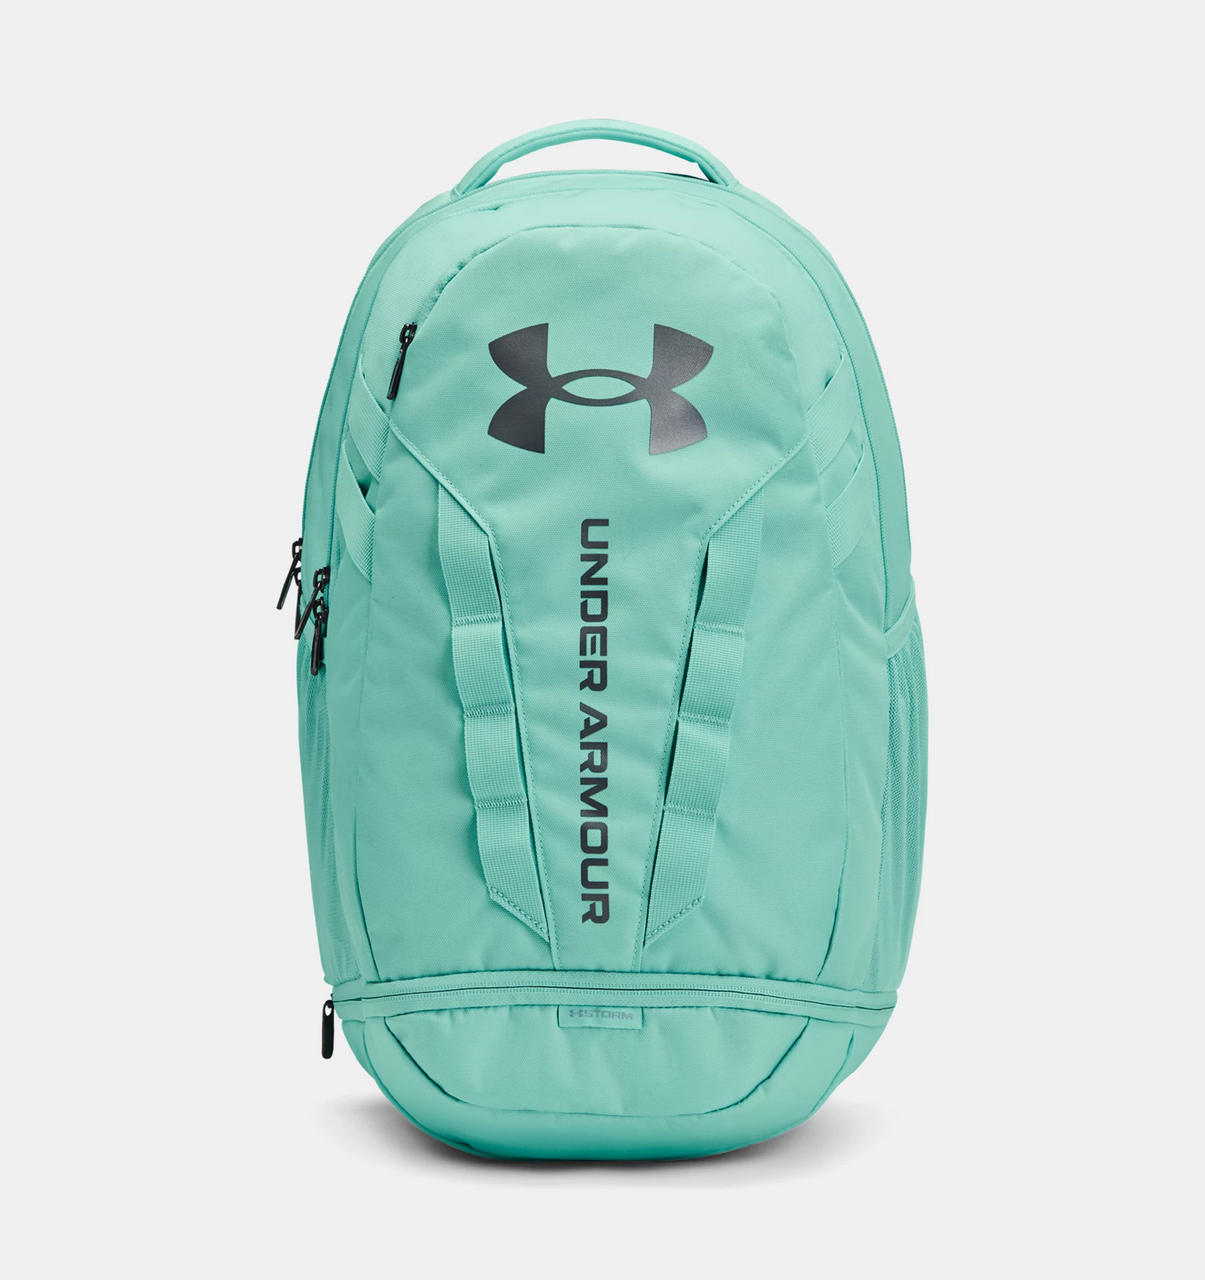 Are you after a new Under Armour backpack